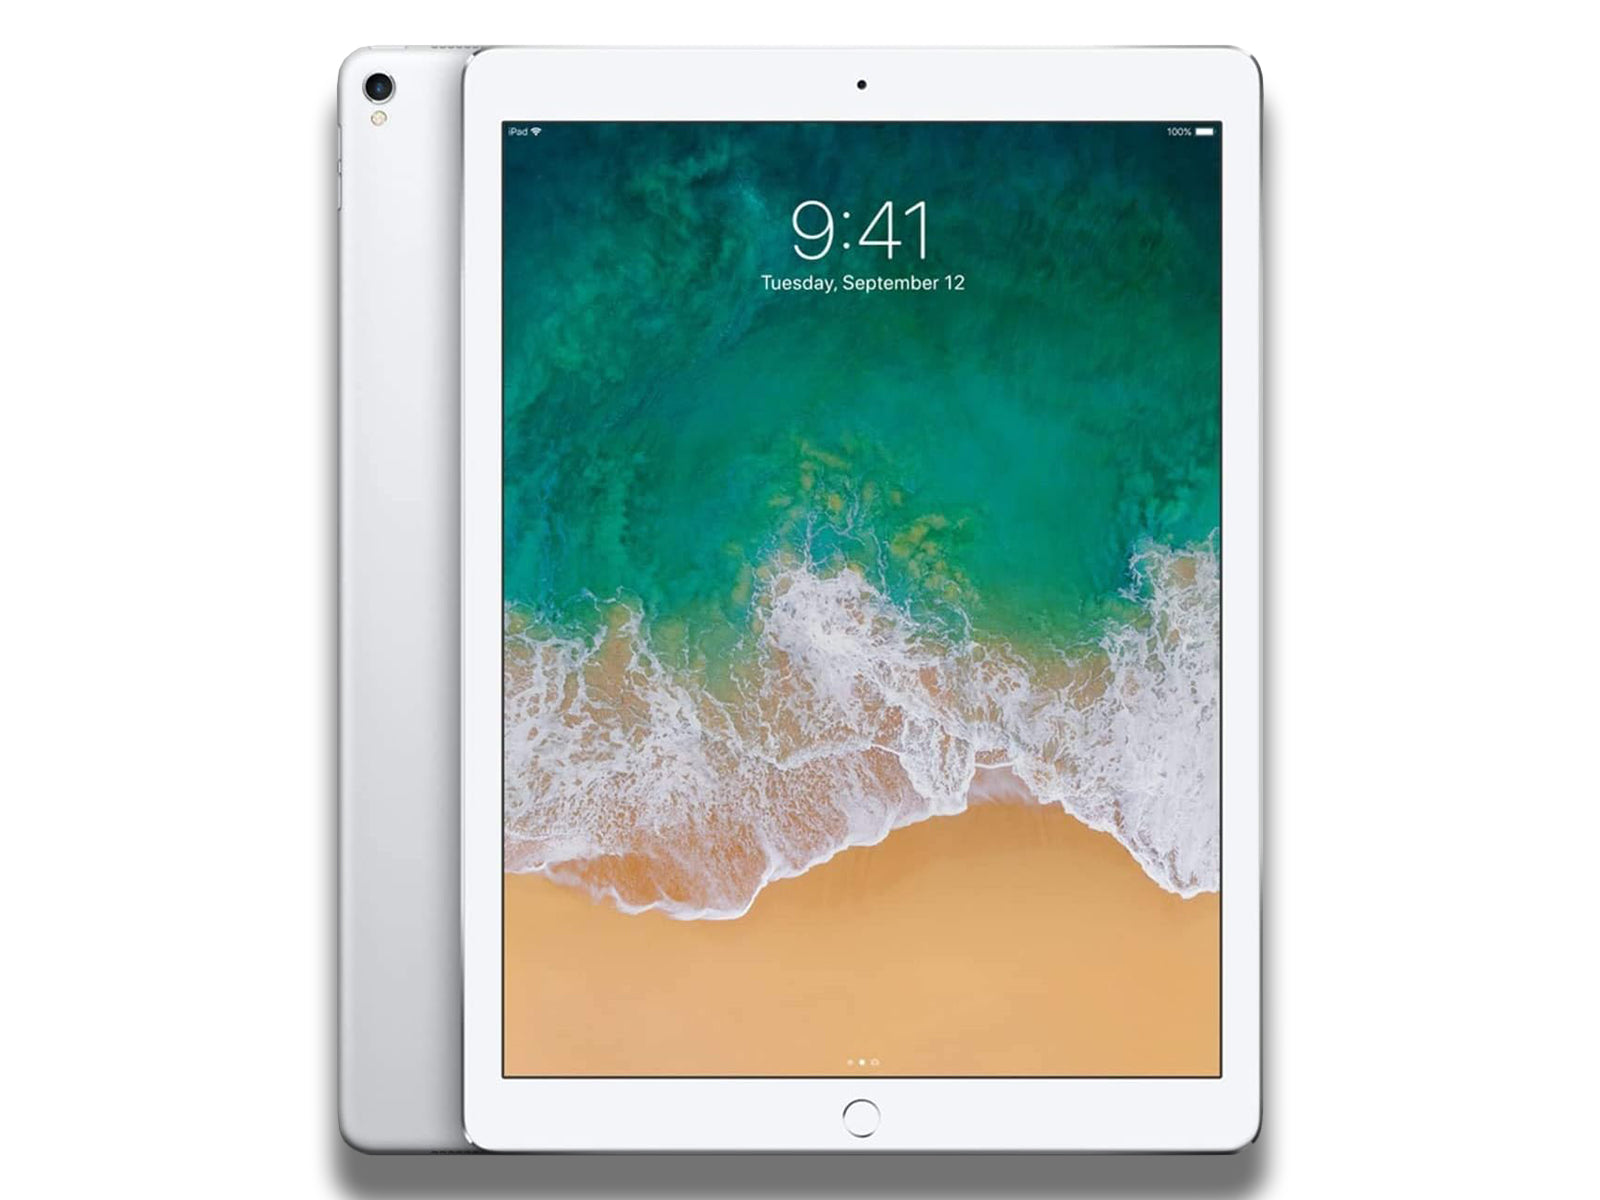 Image shows a front and back view of the silver Apple iPad Pro 12.9-inch 2nd Generation